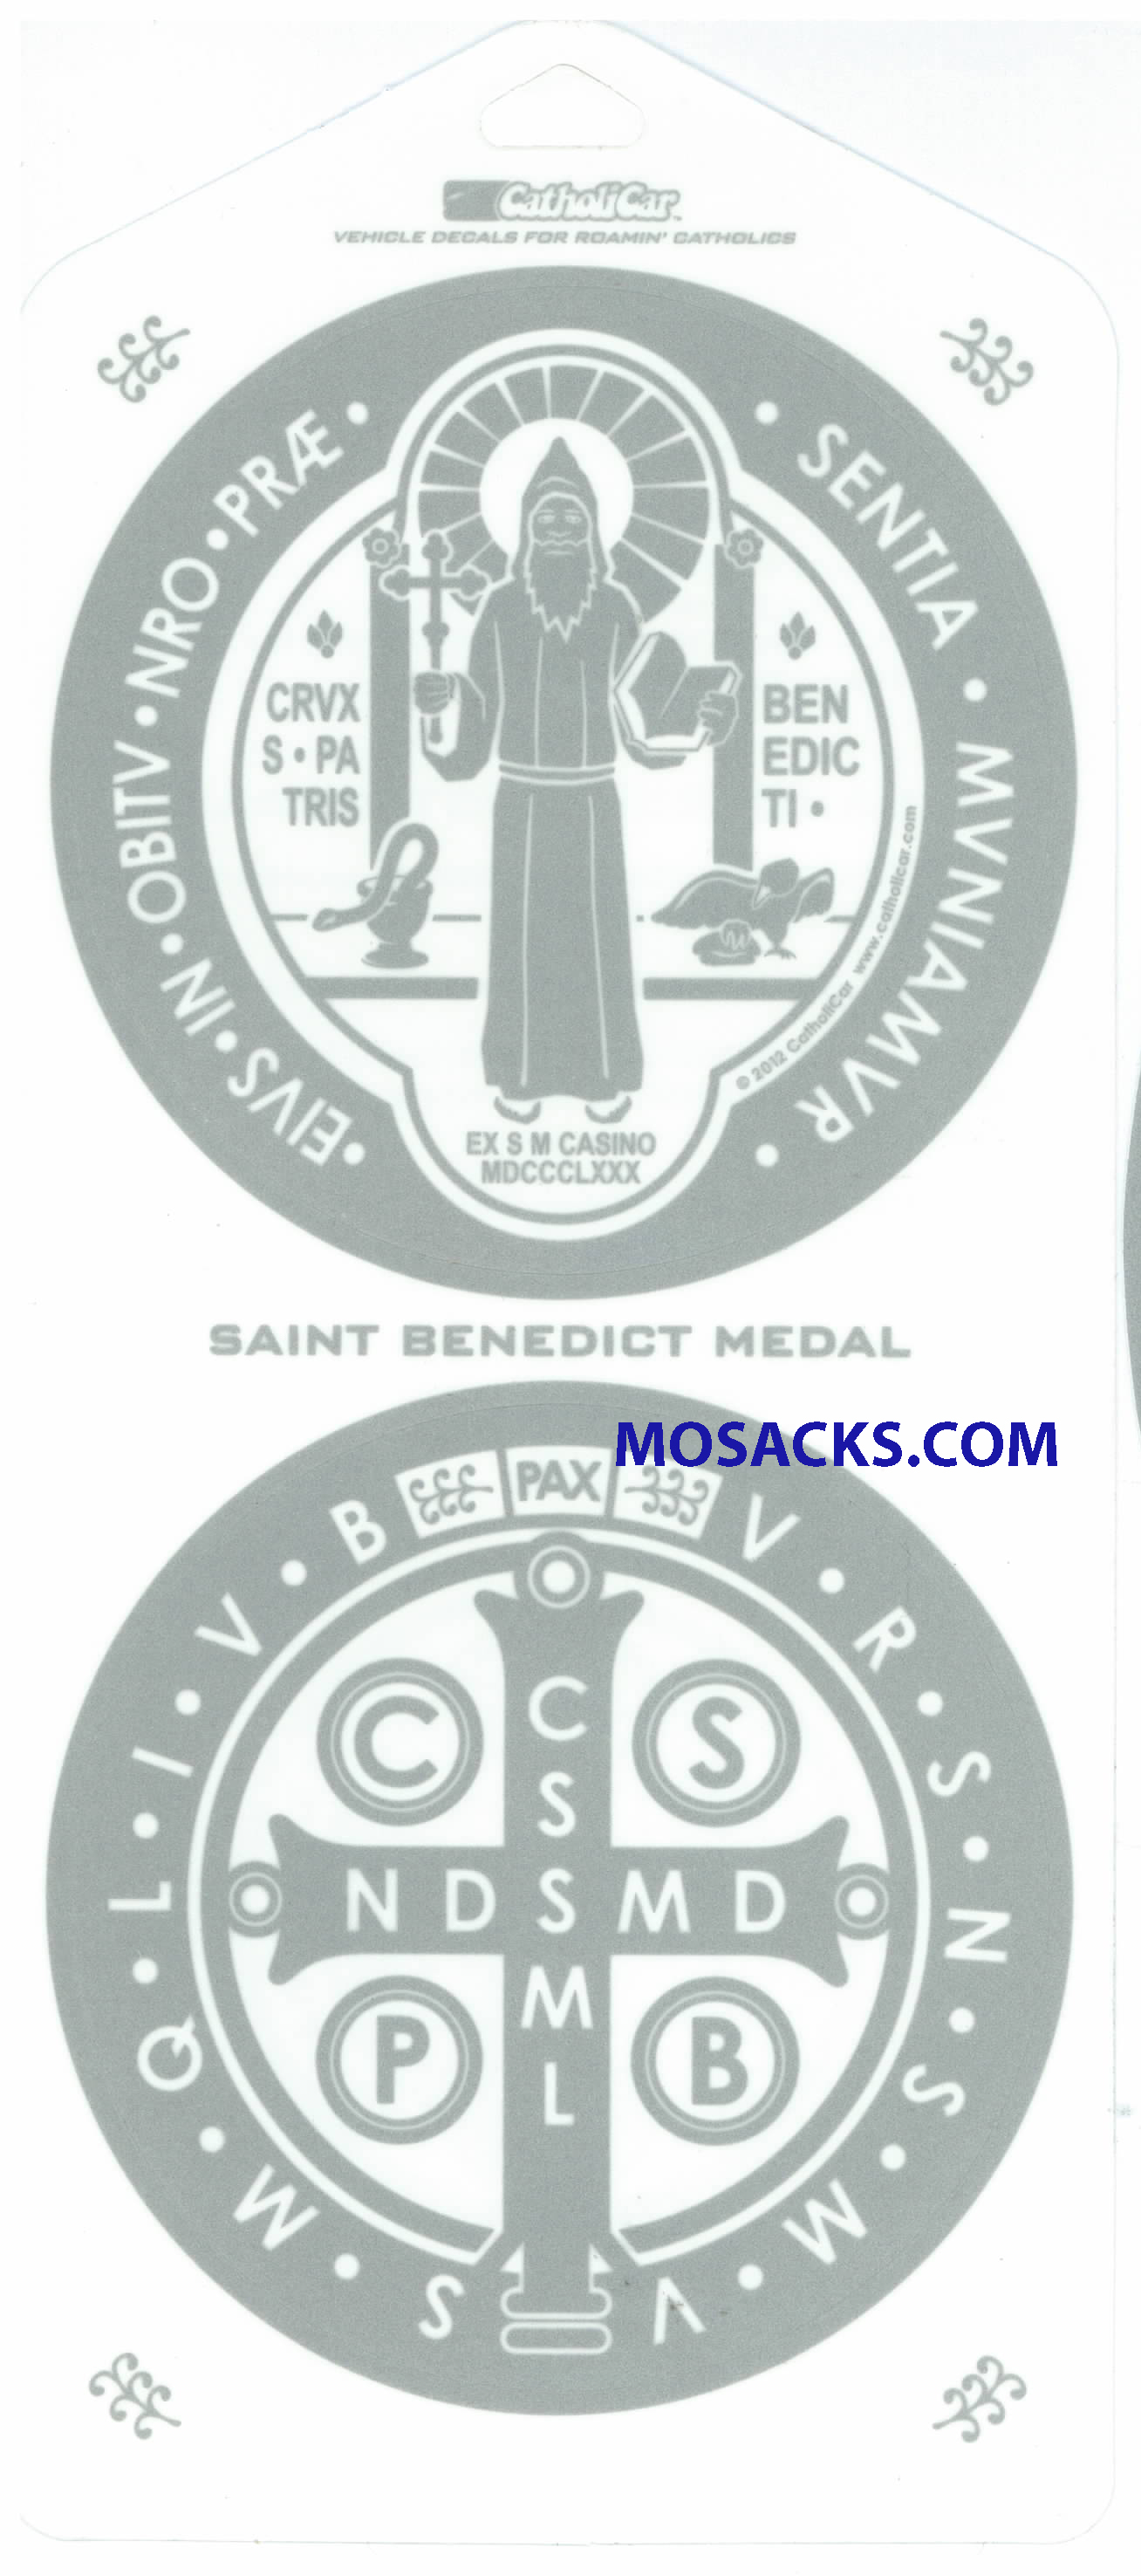 Saint Benedict Double Decal Round Christian Decal, Catholic Decal St Benedict Double Decal